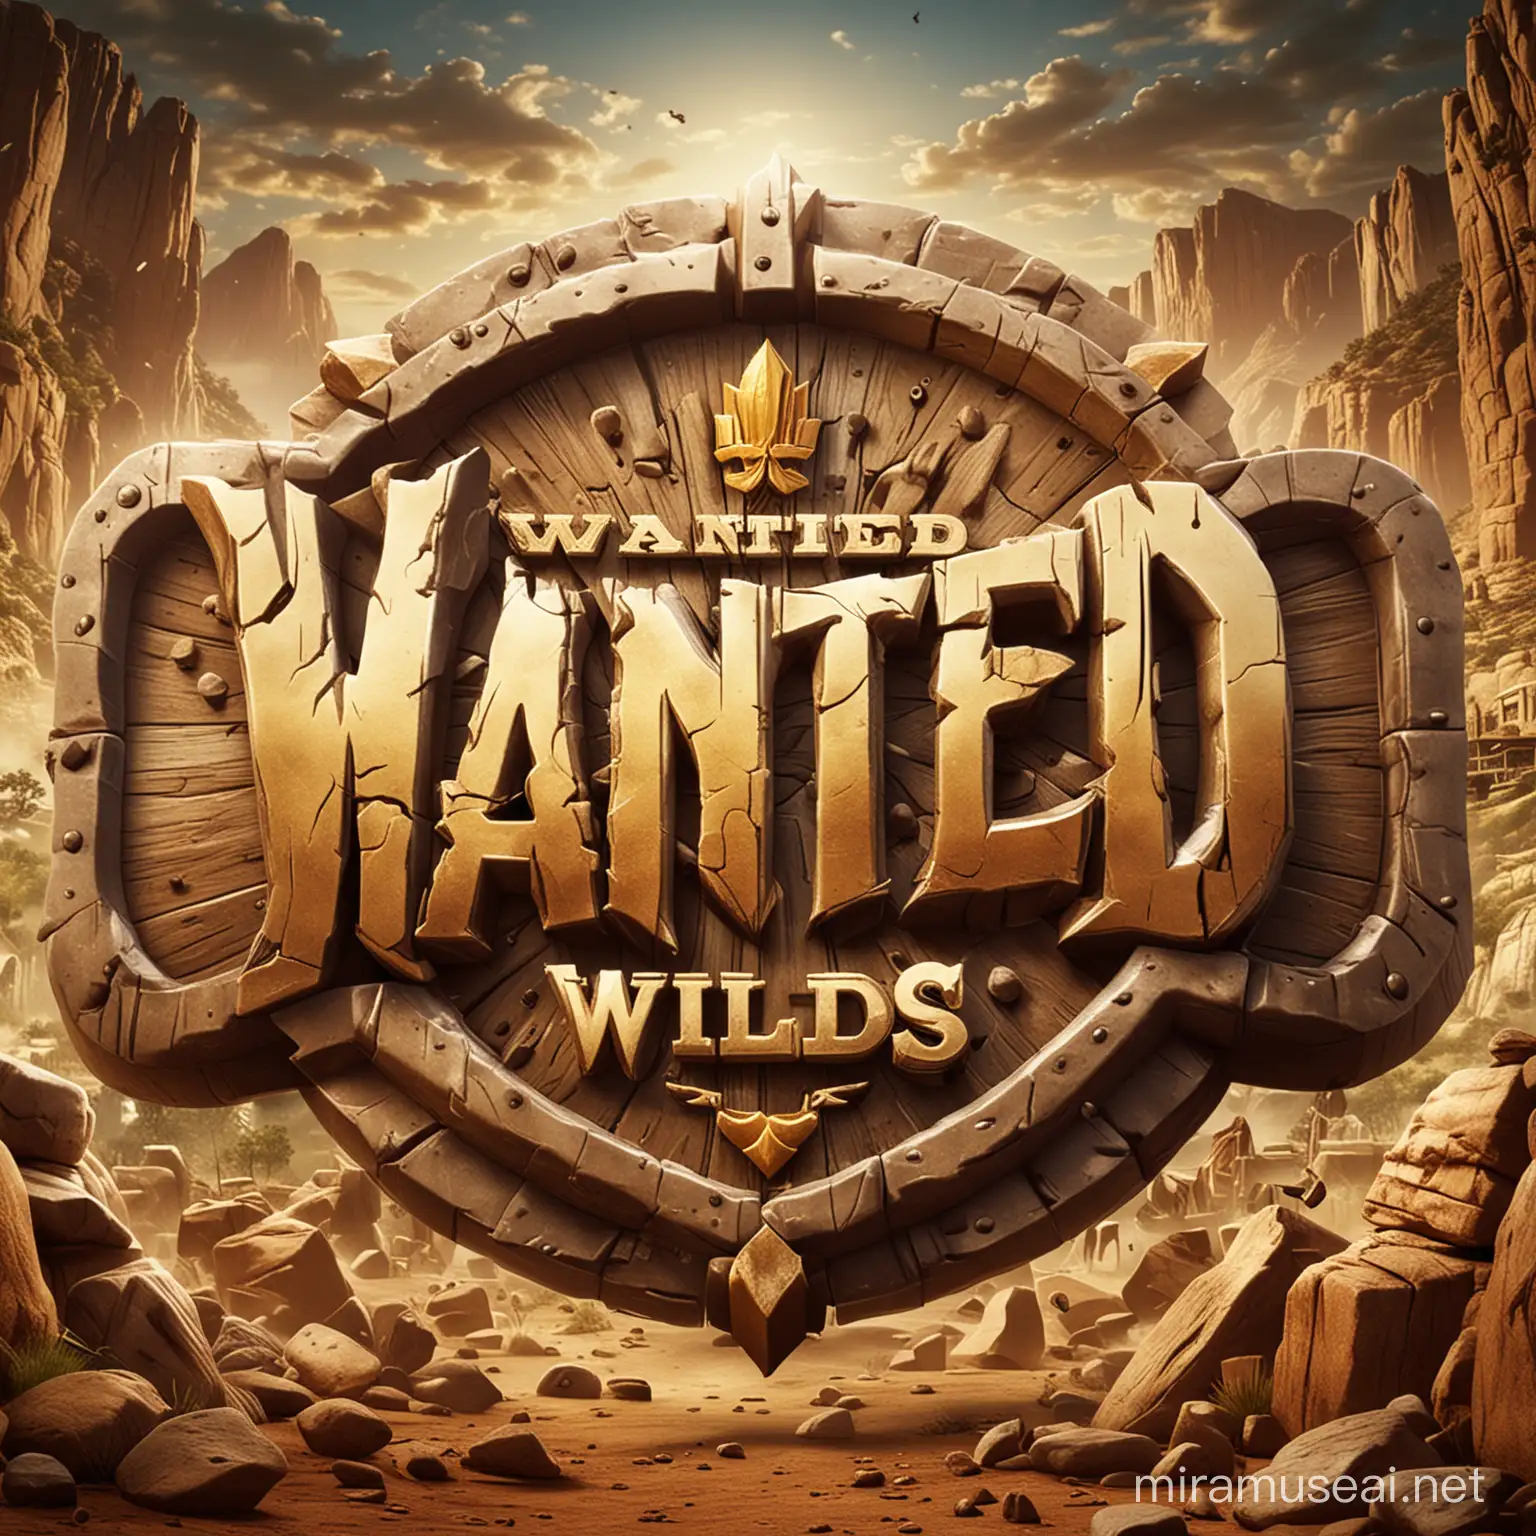 Dynamic 3D Logo Design for Wanted Wilds Casino Capturing the Thrill of Gaming